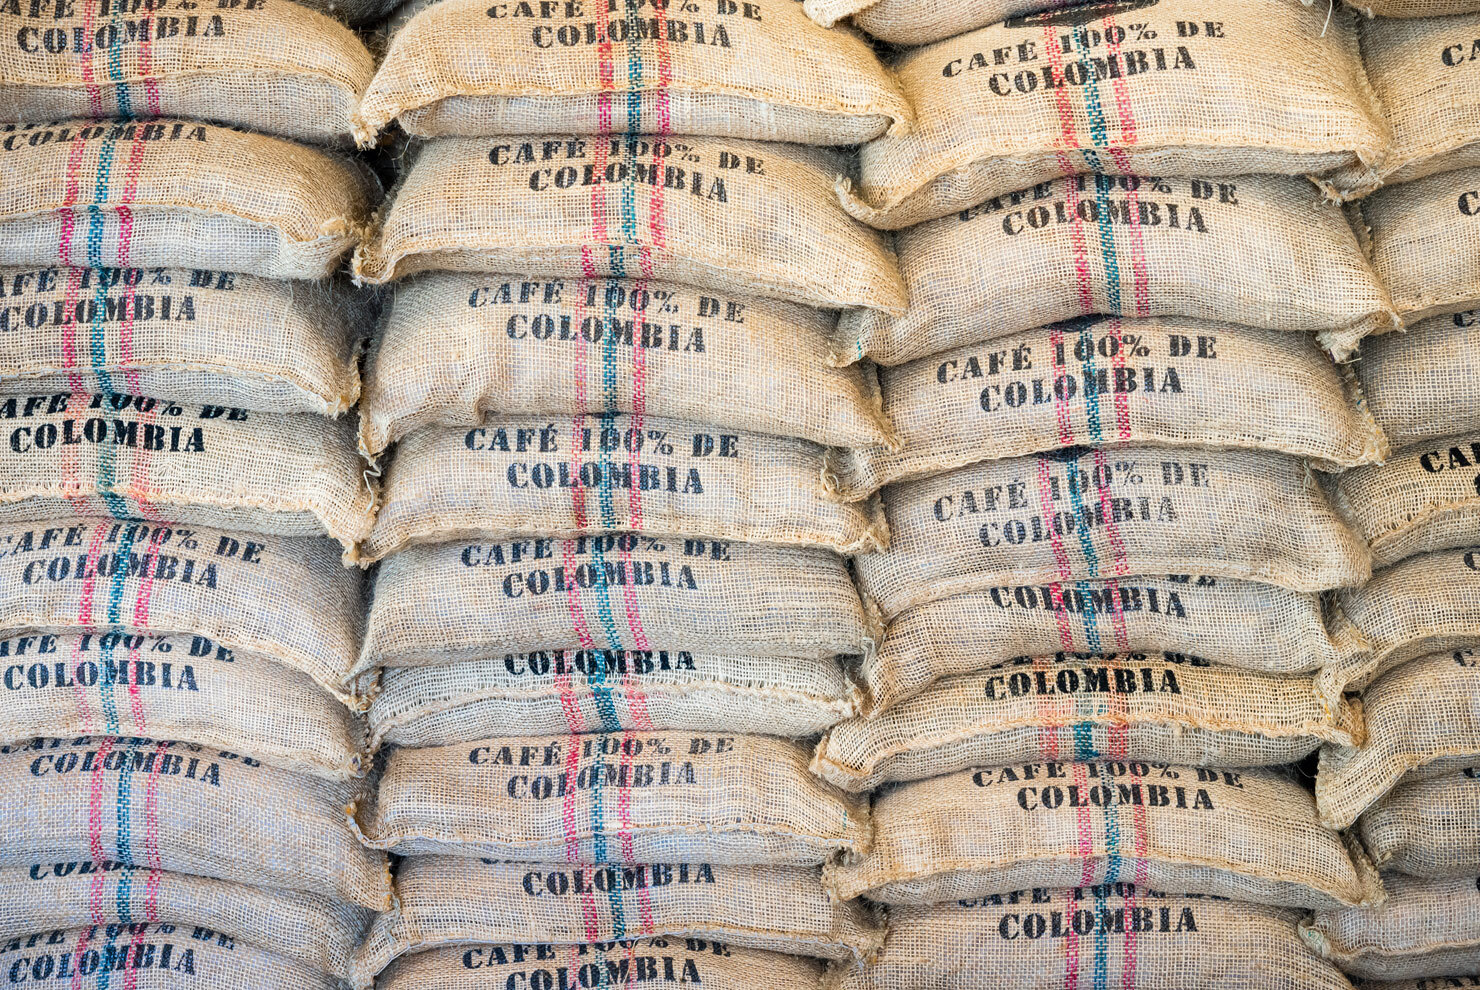 Colombian Coffee Coffee Industry shut down due to domestic situation